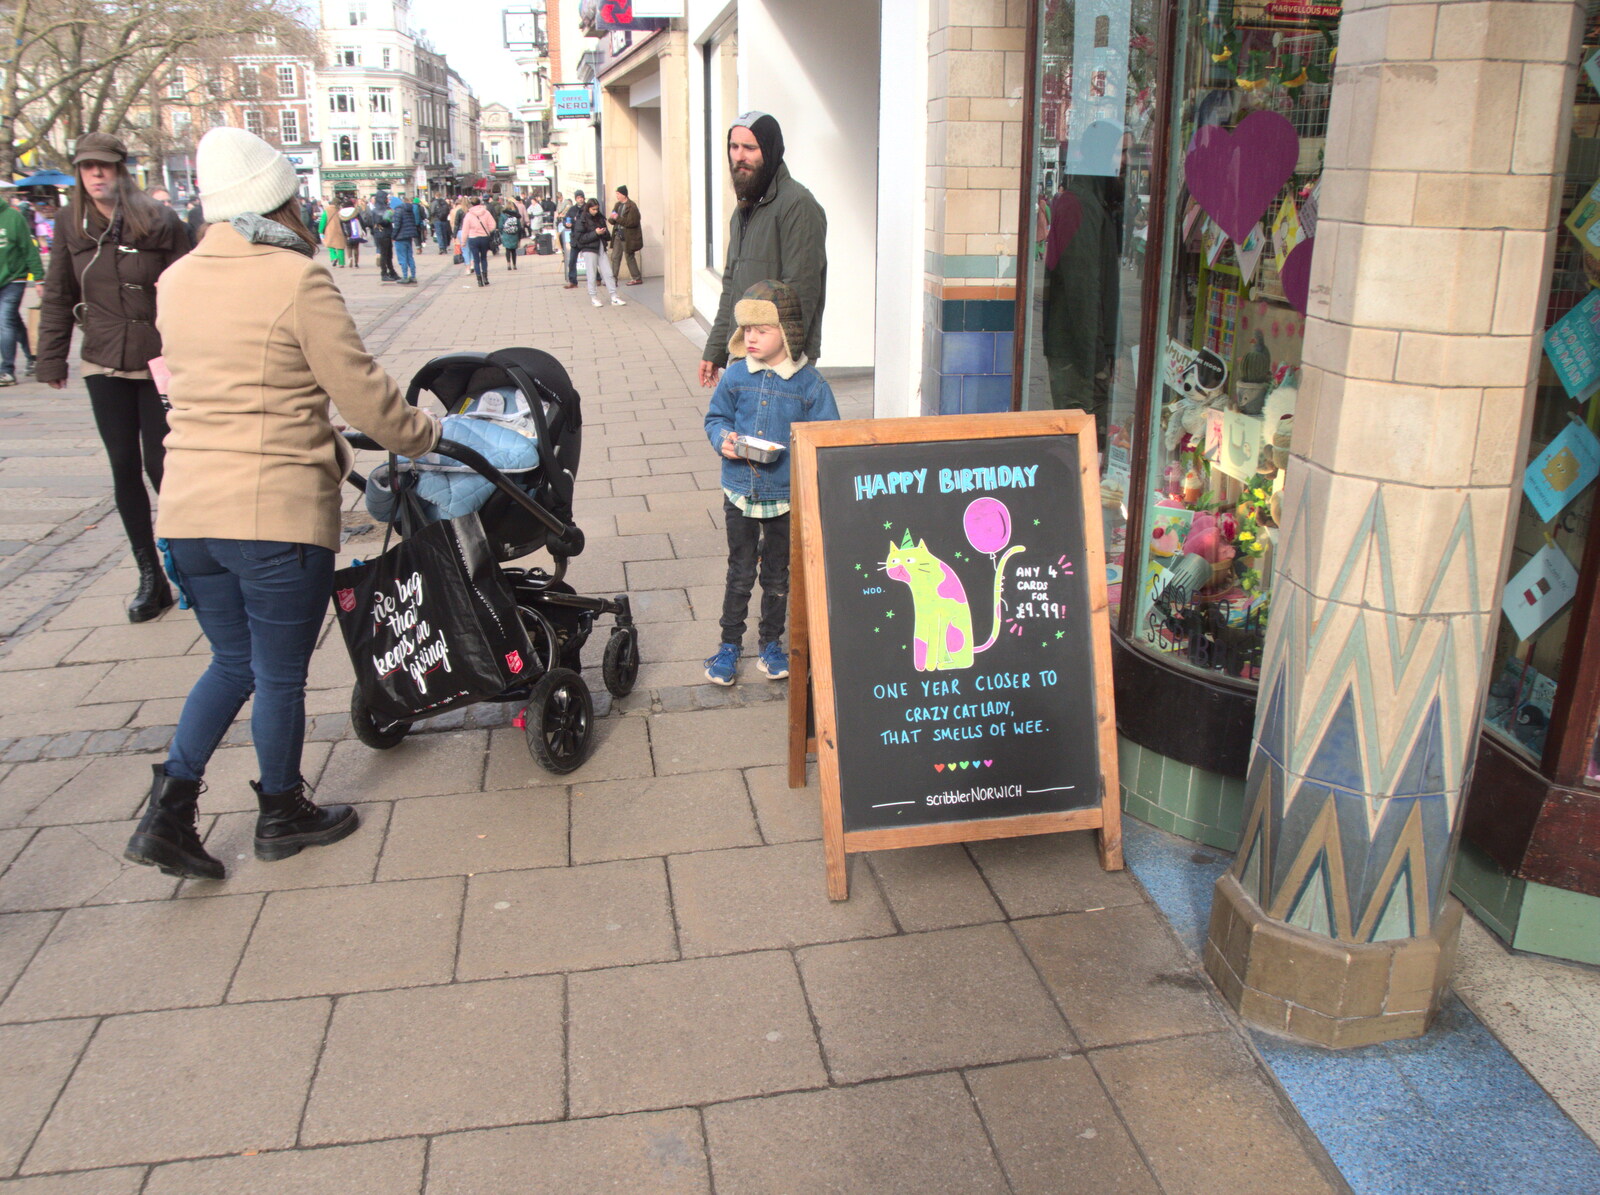 The Detectorists, and a Trip to the Market, Norwich - 25th February 2023: An amusing shop sign on Gentleman's Walk